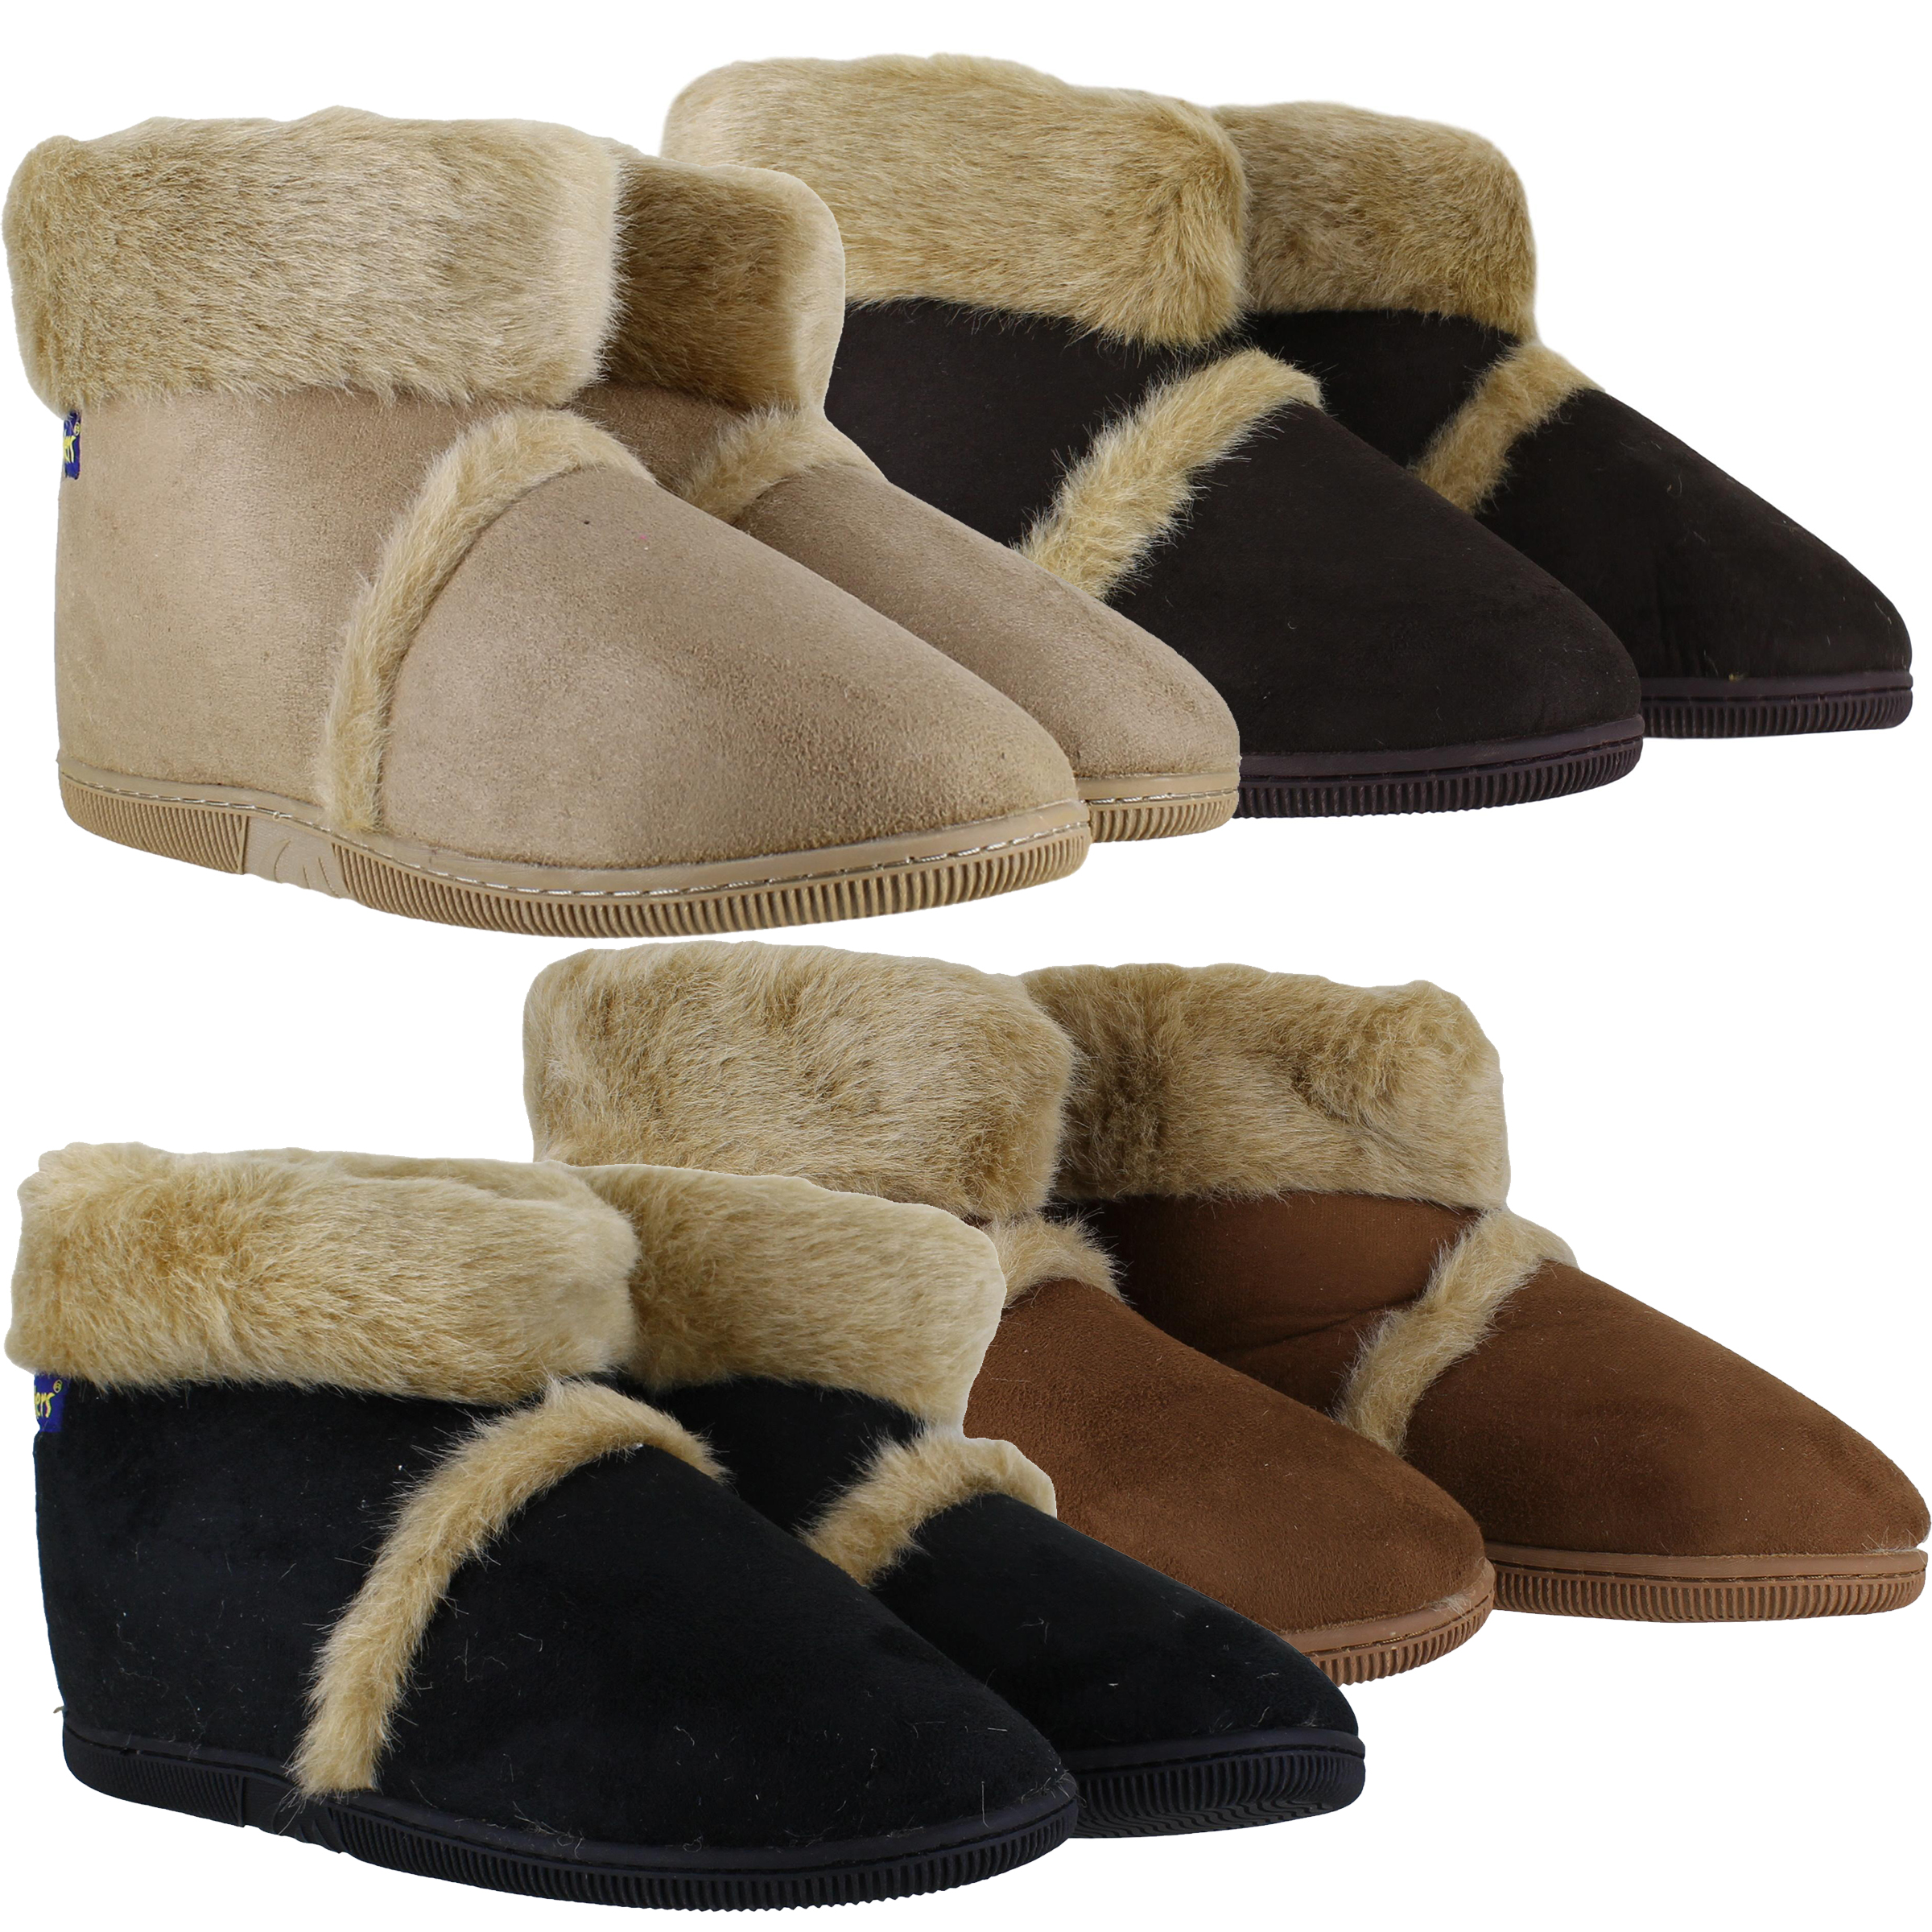 mens slipper boots with hard sole